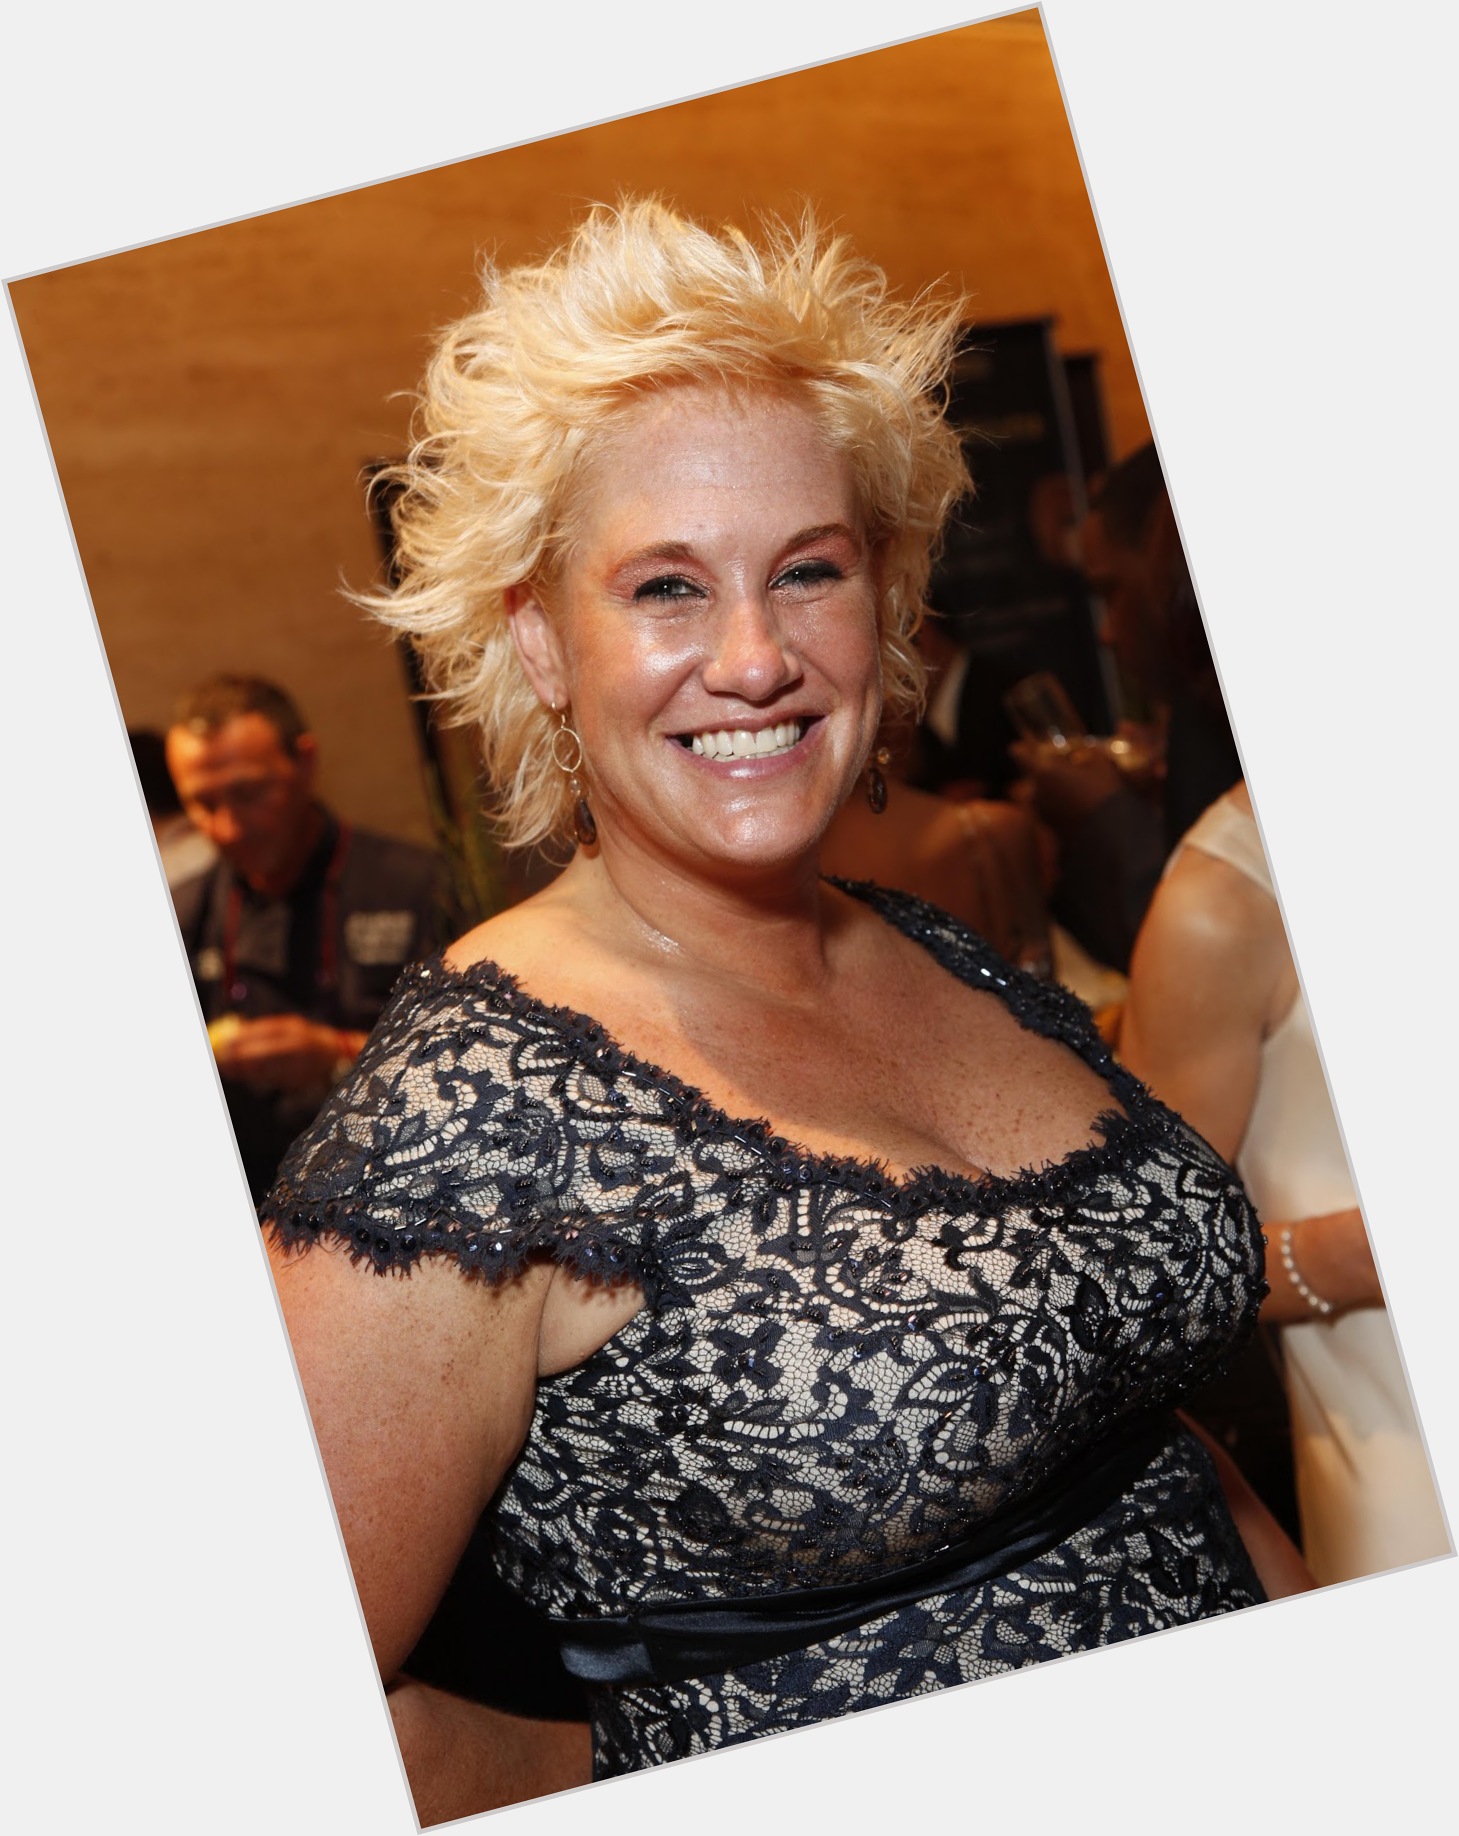 Anne Burrell dating 2